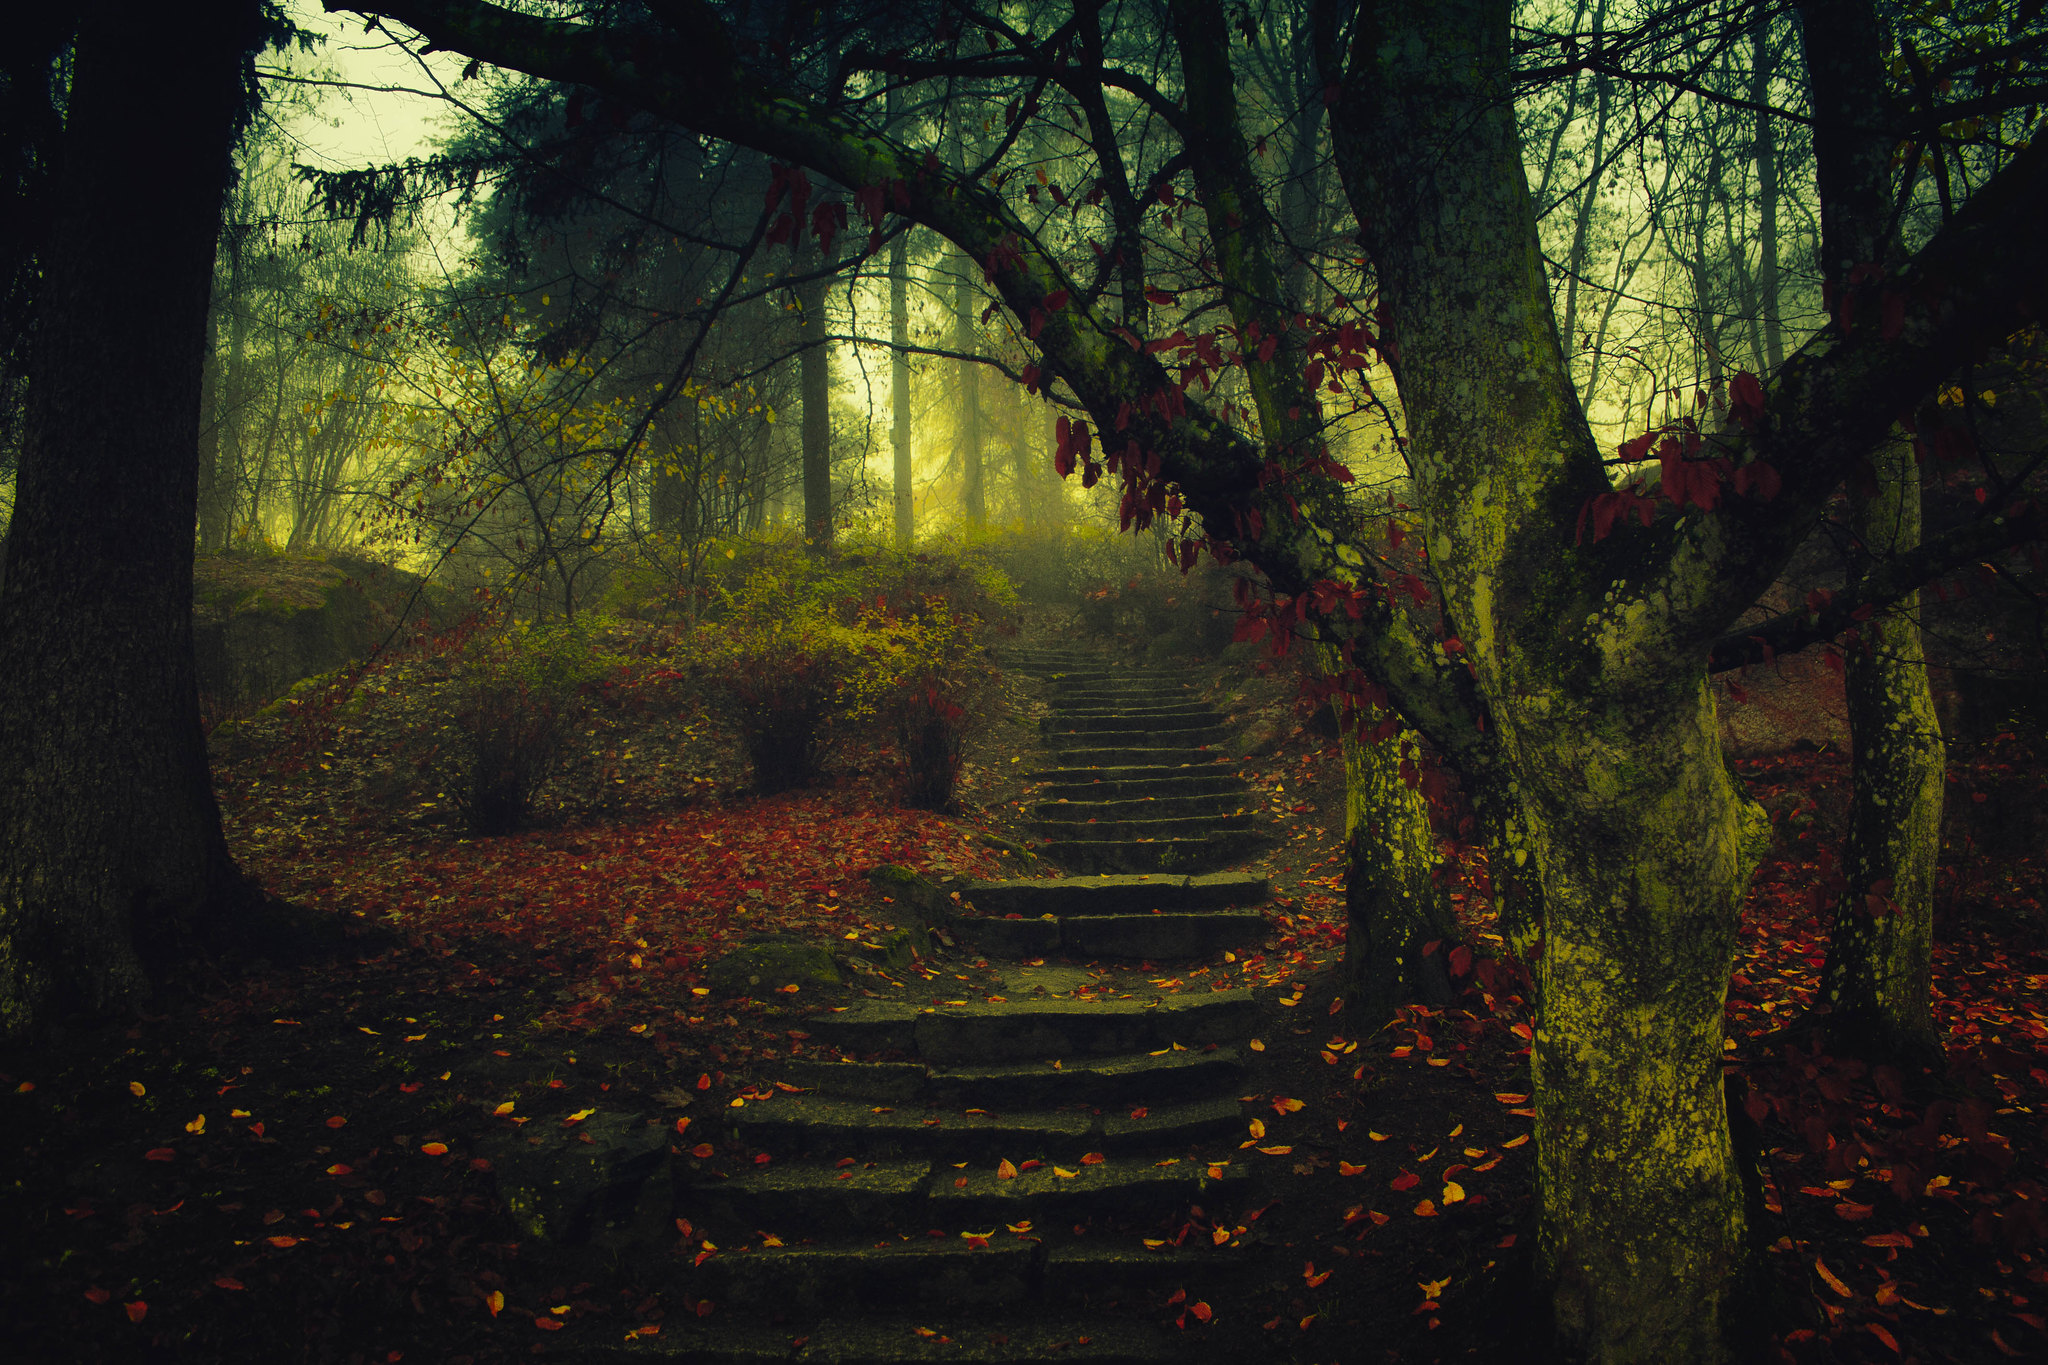 General 2048x1365 forest trees landscape nature mist fall steps leaves photography